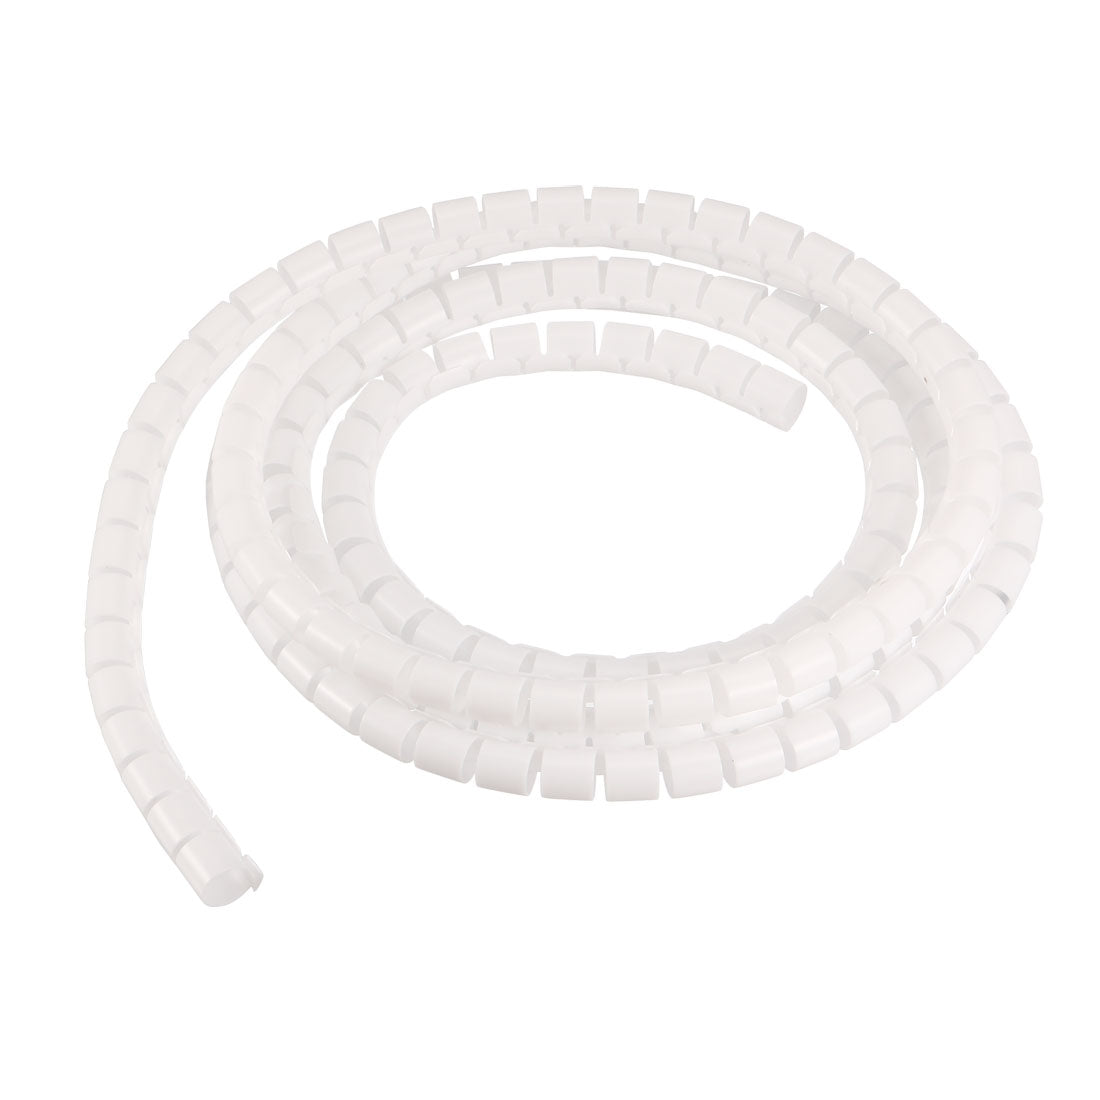 uxcell Uxcell Cable Management Sleeve Wire Wrap Cord Organizer 7mm x 8mm 2 Meters Length White